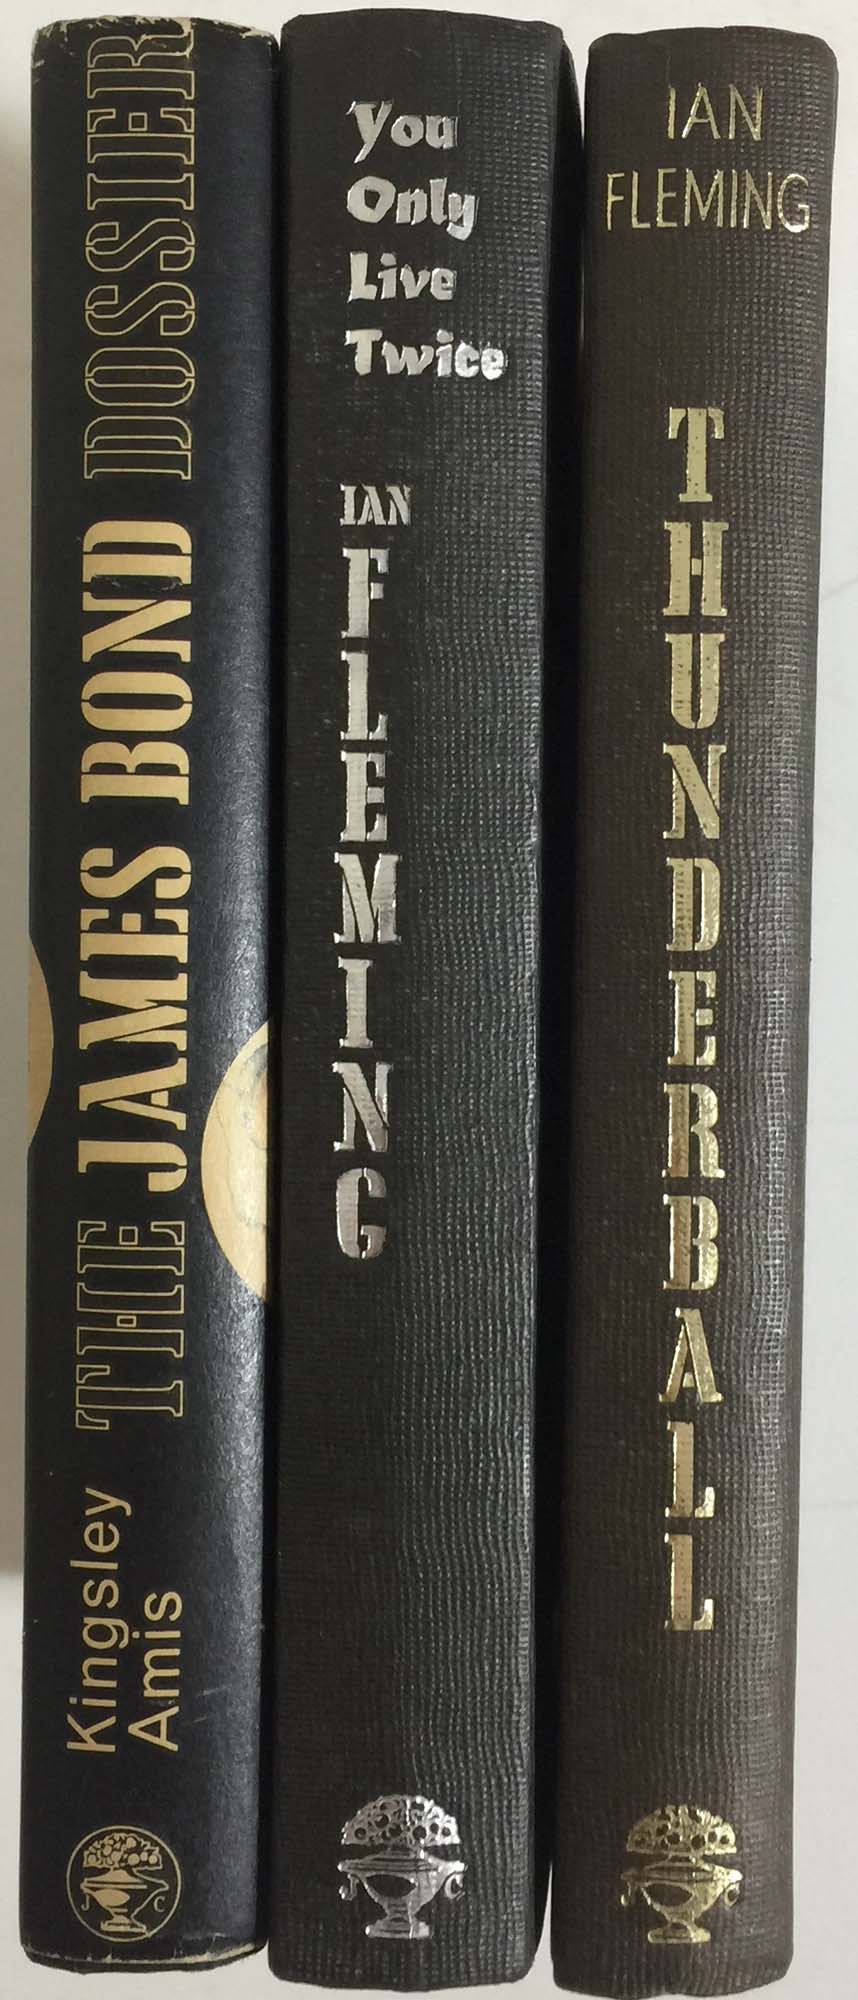 JAMES BOND FIRST EDITIONS. - Image 2 of 6